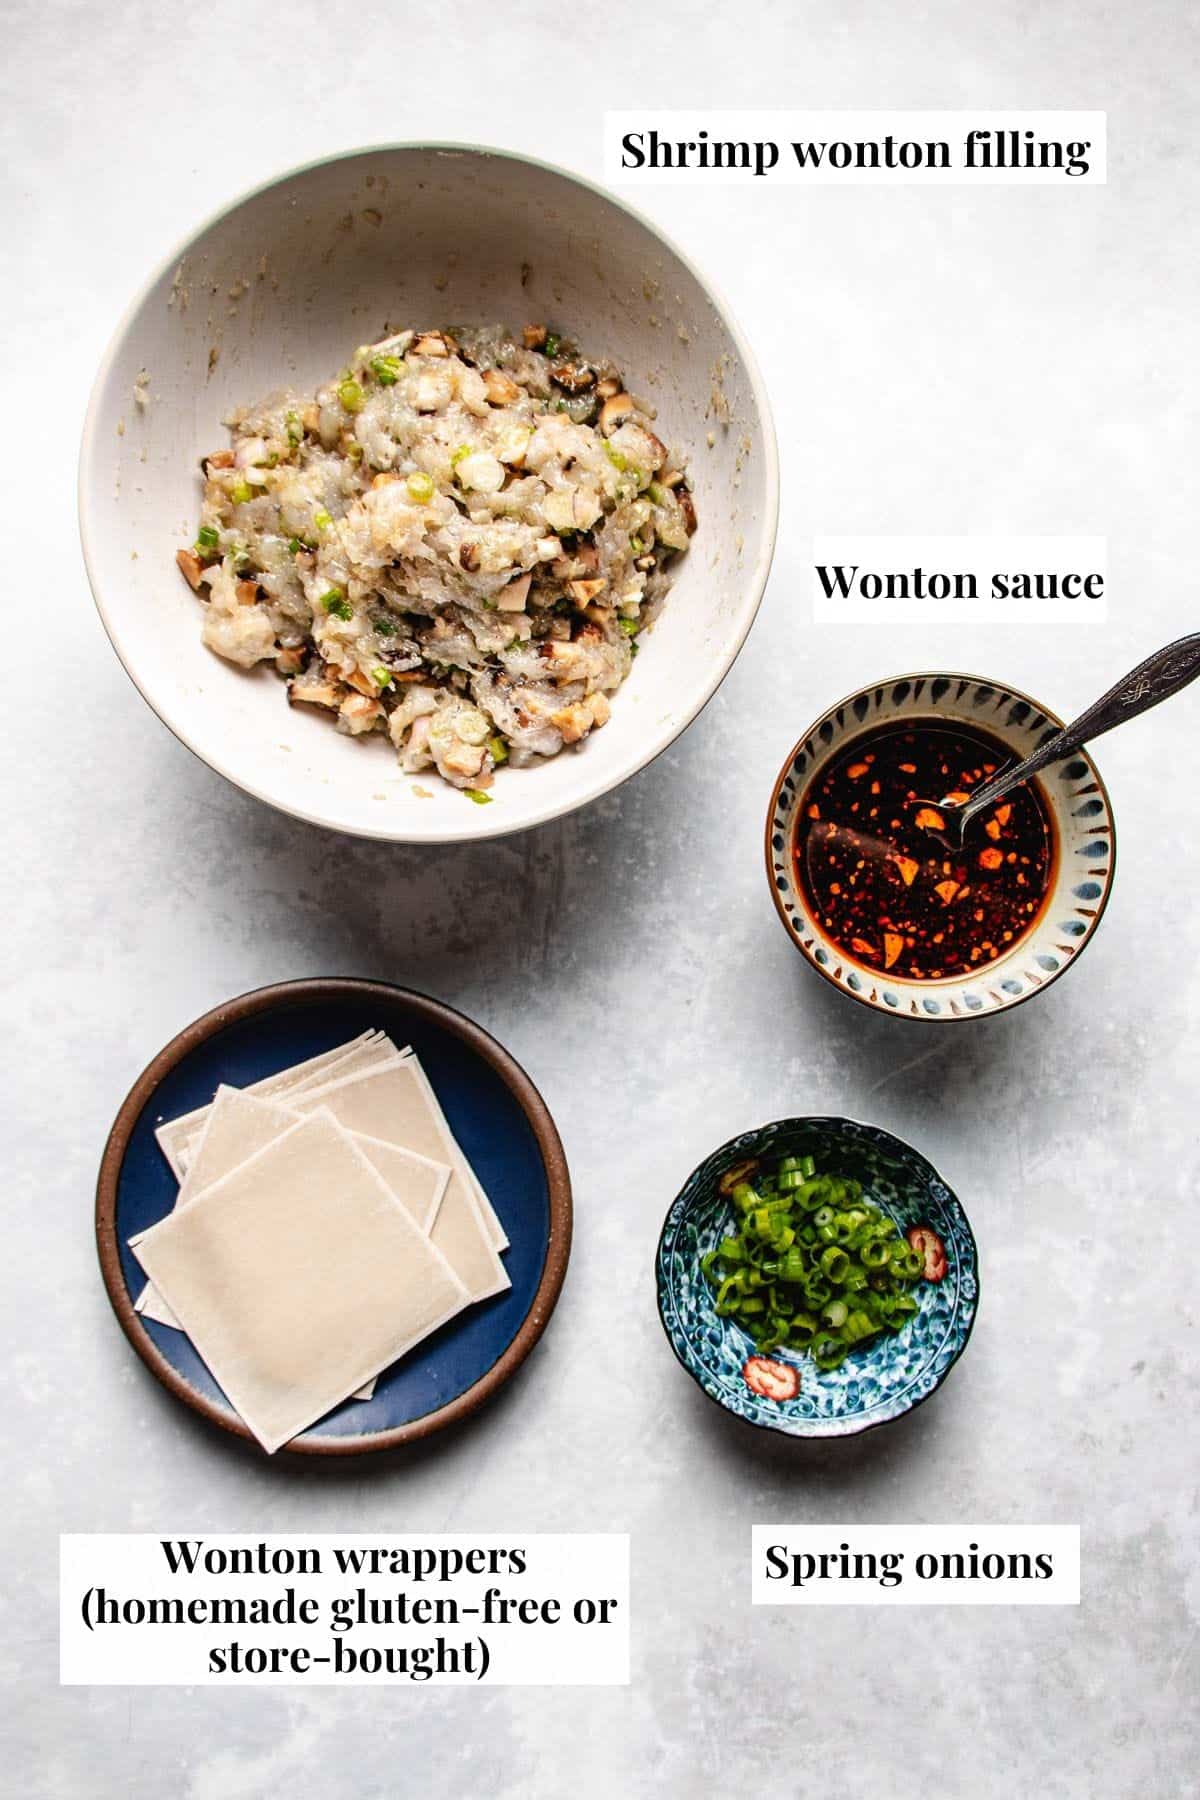 Image shows ingredients used to make shrimp wontons at home.